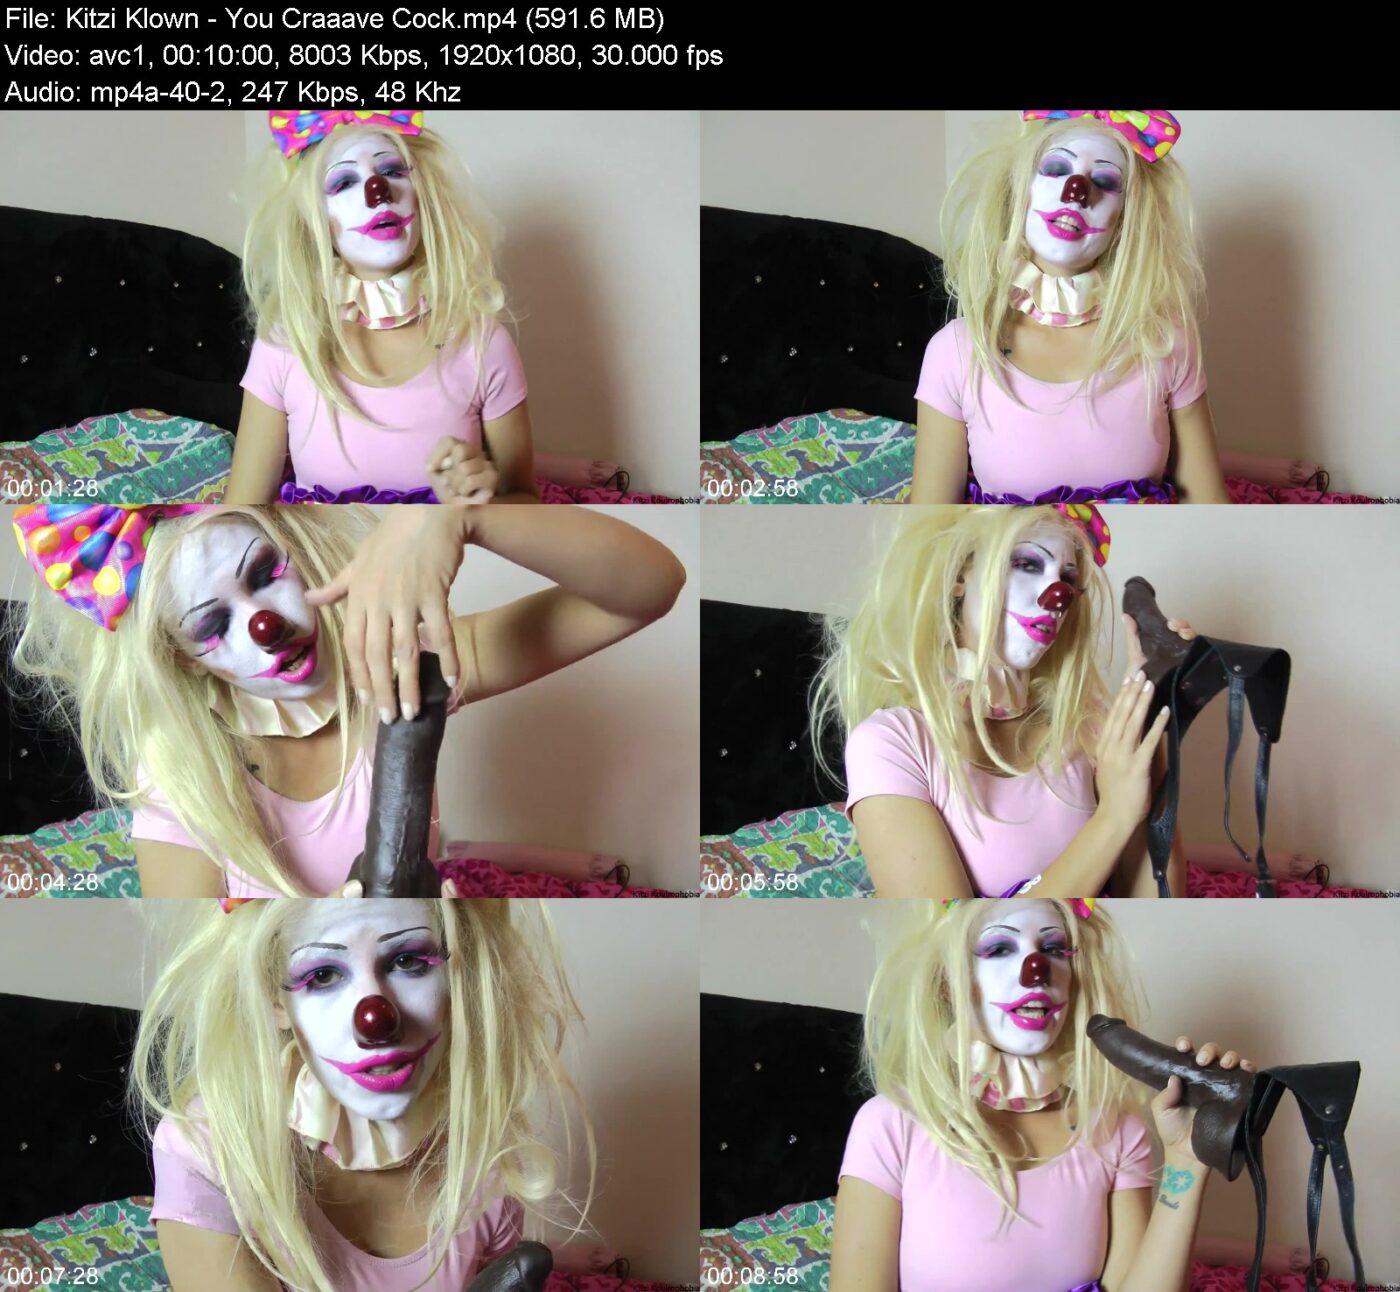 Actress: Kitzi Klown. Title and Studio: You Craaave Cock